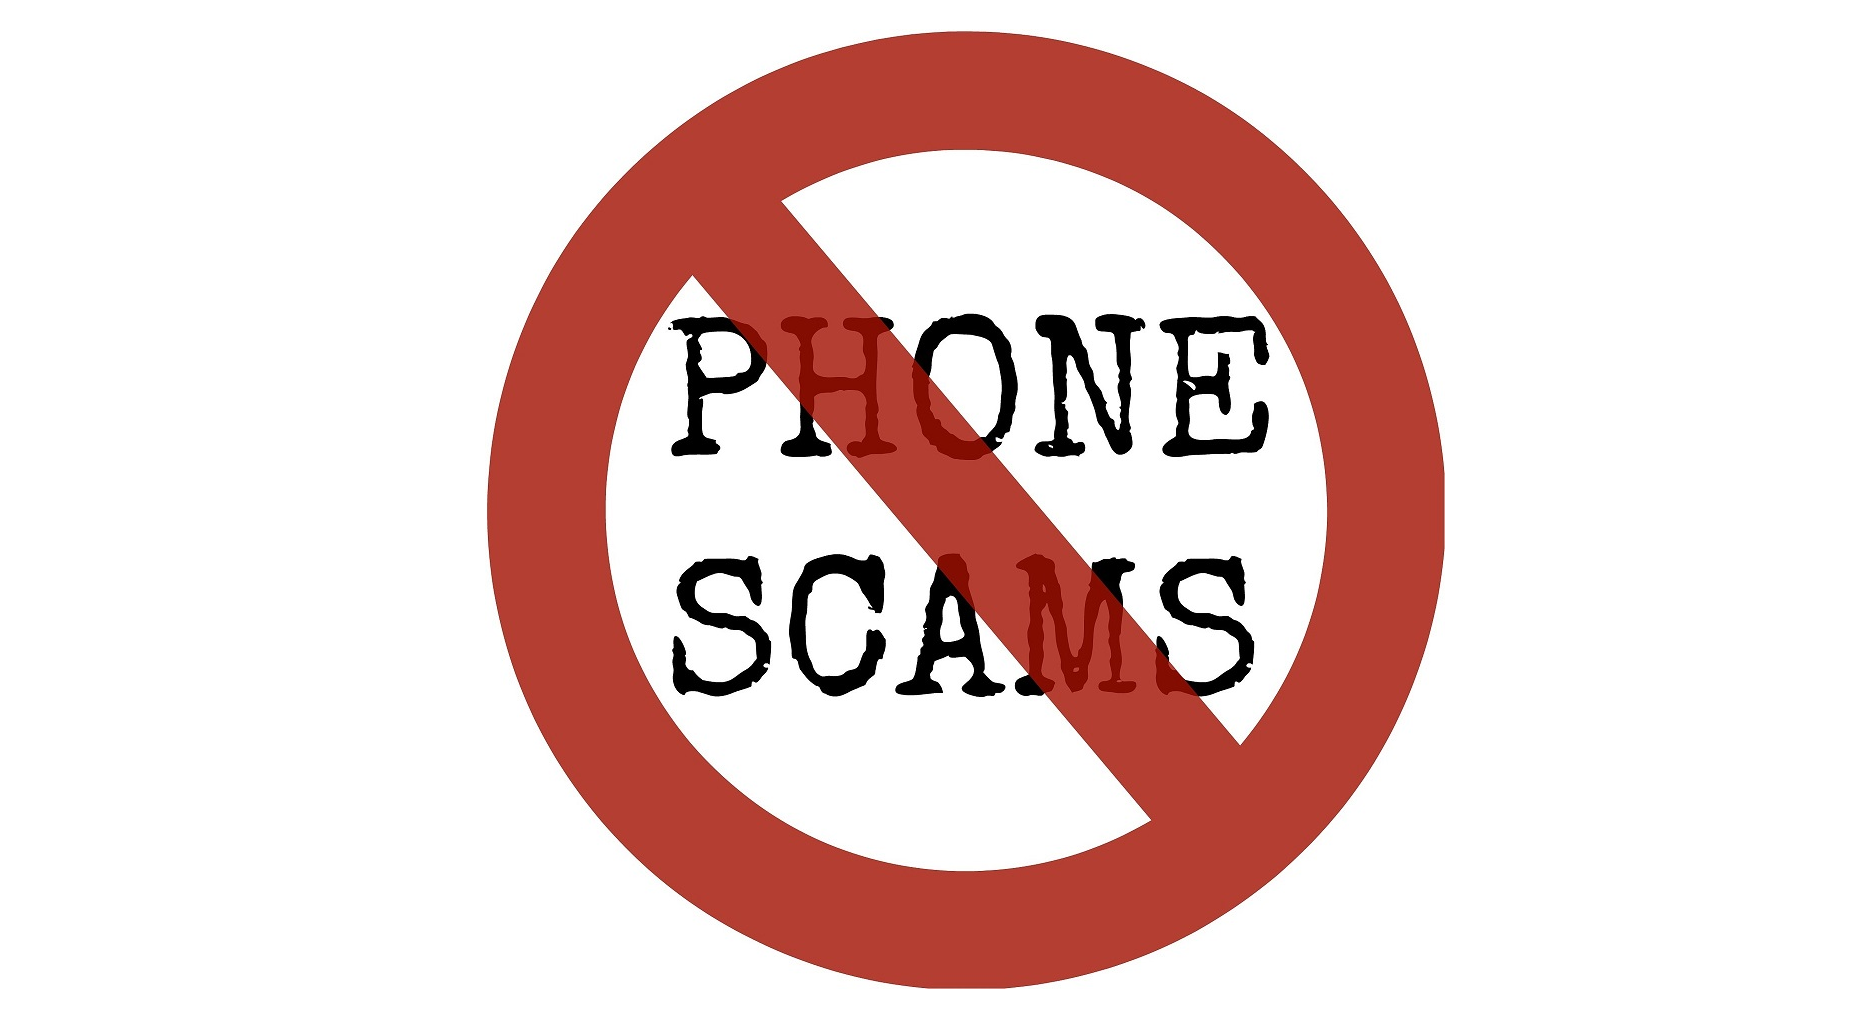 Do Not Return A Call Or Text From These Area Codes It May Be A Scam Joseph Steinberg Cybersecurity Privacy Artificial Intelligence Ai Advisor